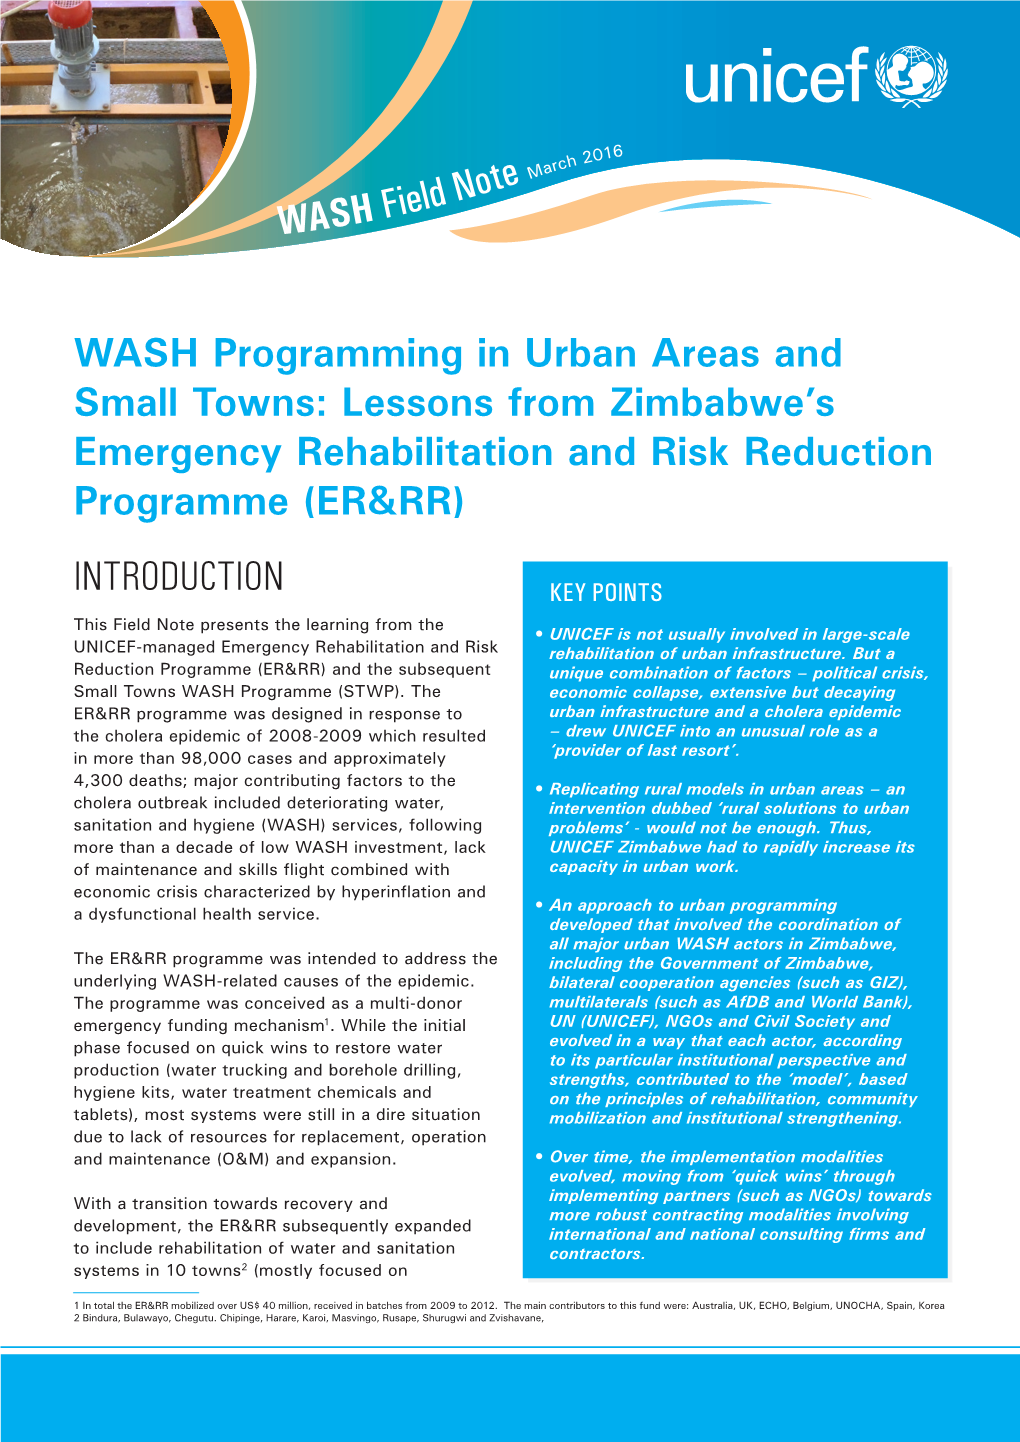 WASH Programming in Urban Areas and Small Towns: Lessons From